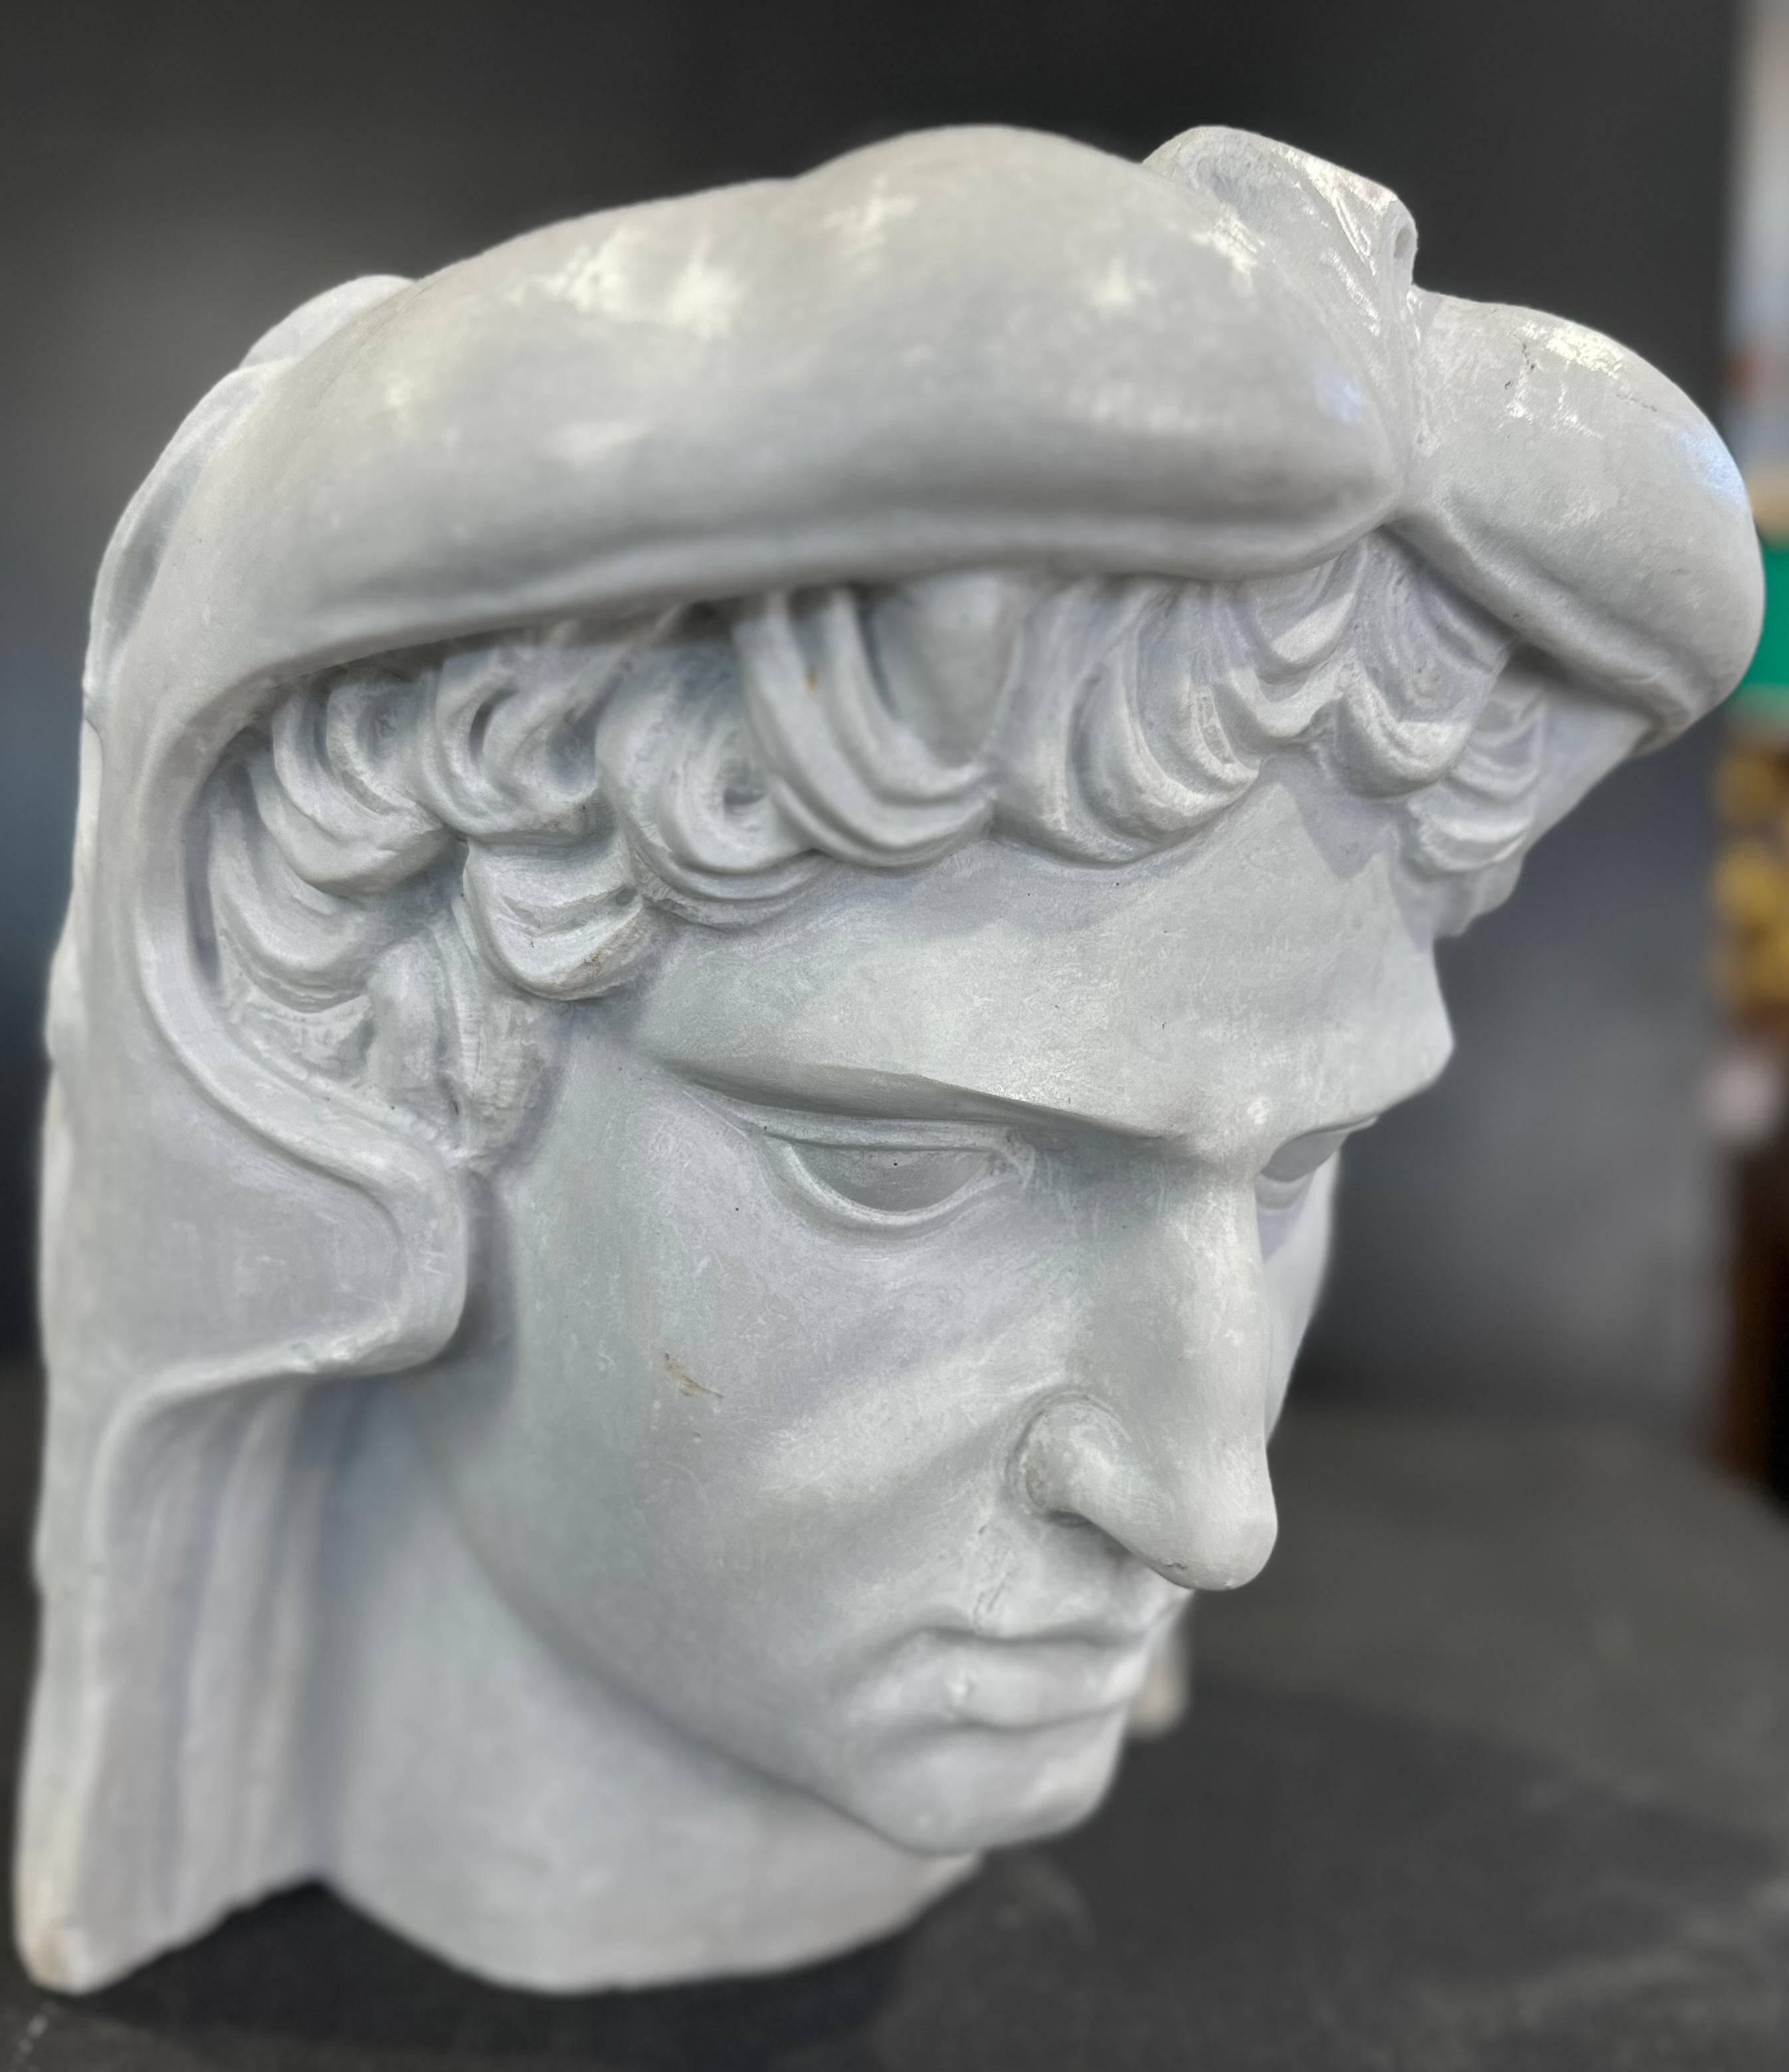 Beautifully hand carved marble head. The carving is well executed with clear features including curling hair and aquiline nose. Wearing a helmet carved as wildcat skin. 

This piece would look great as a table piece or as part of a collection.